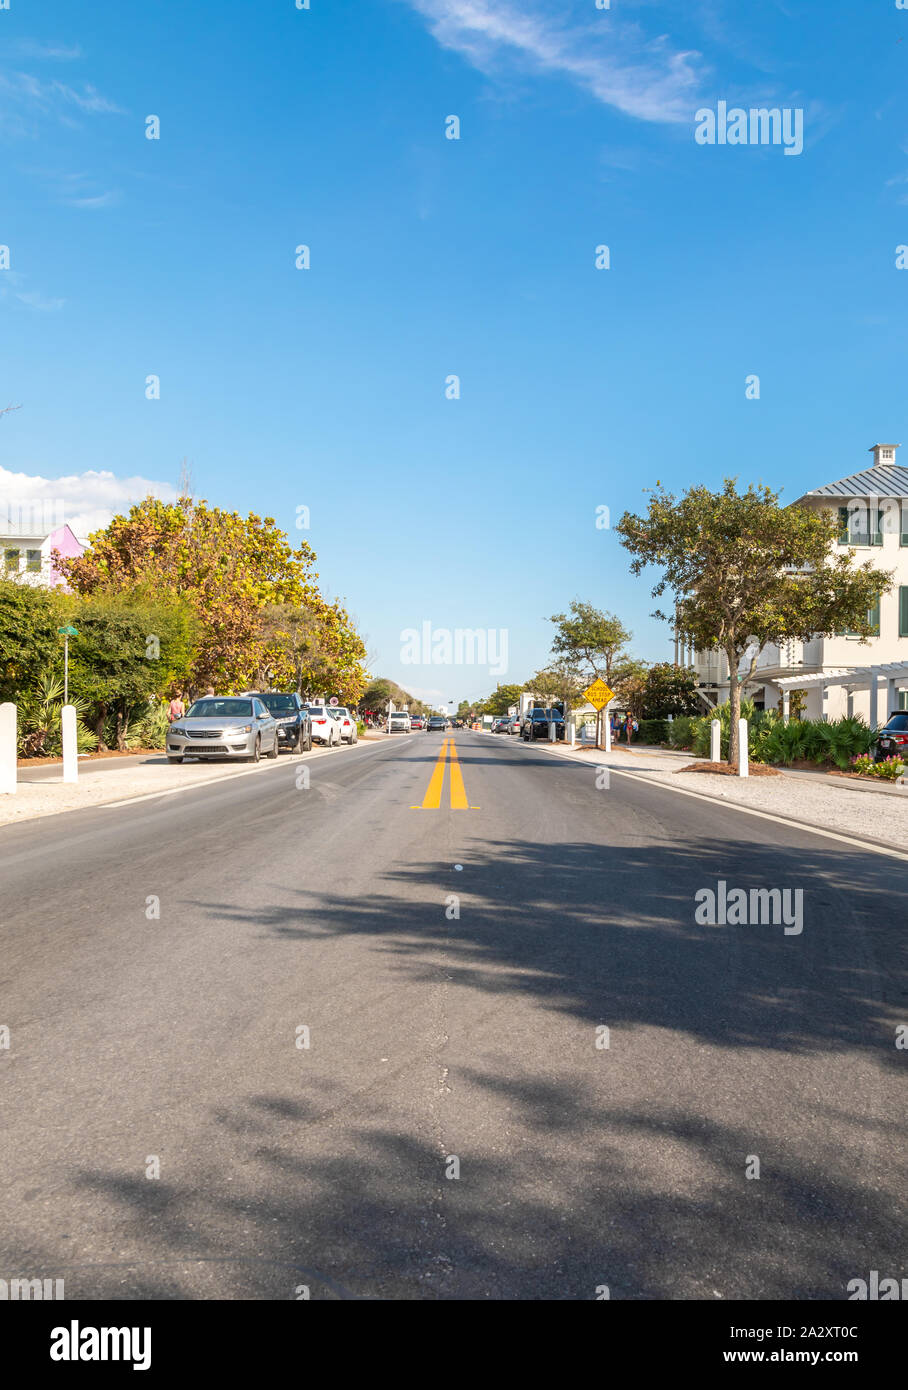 shot looking down 30a in Seaside, Florida Stock Photo